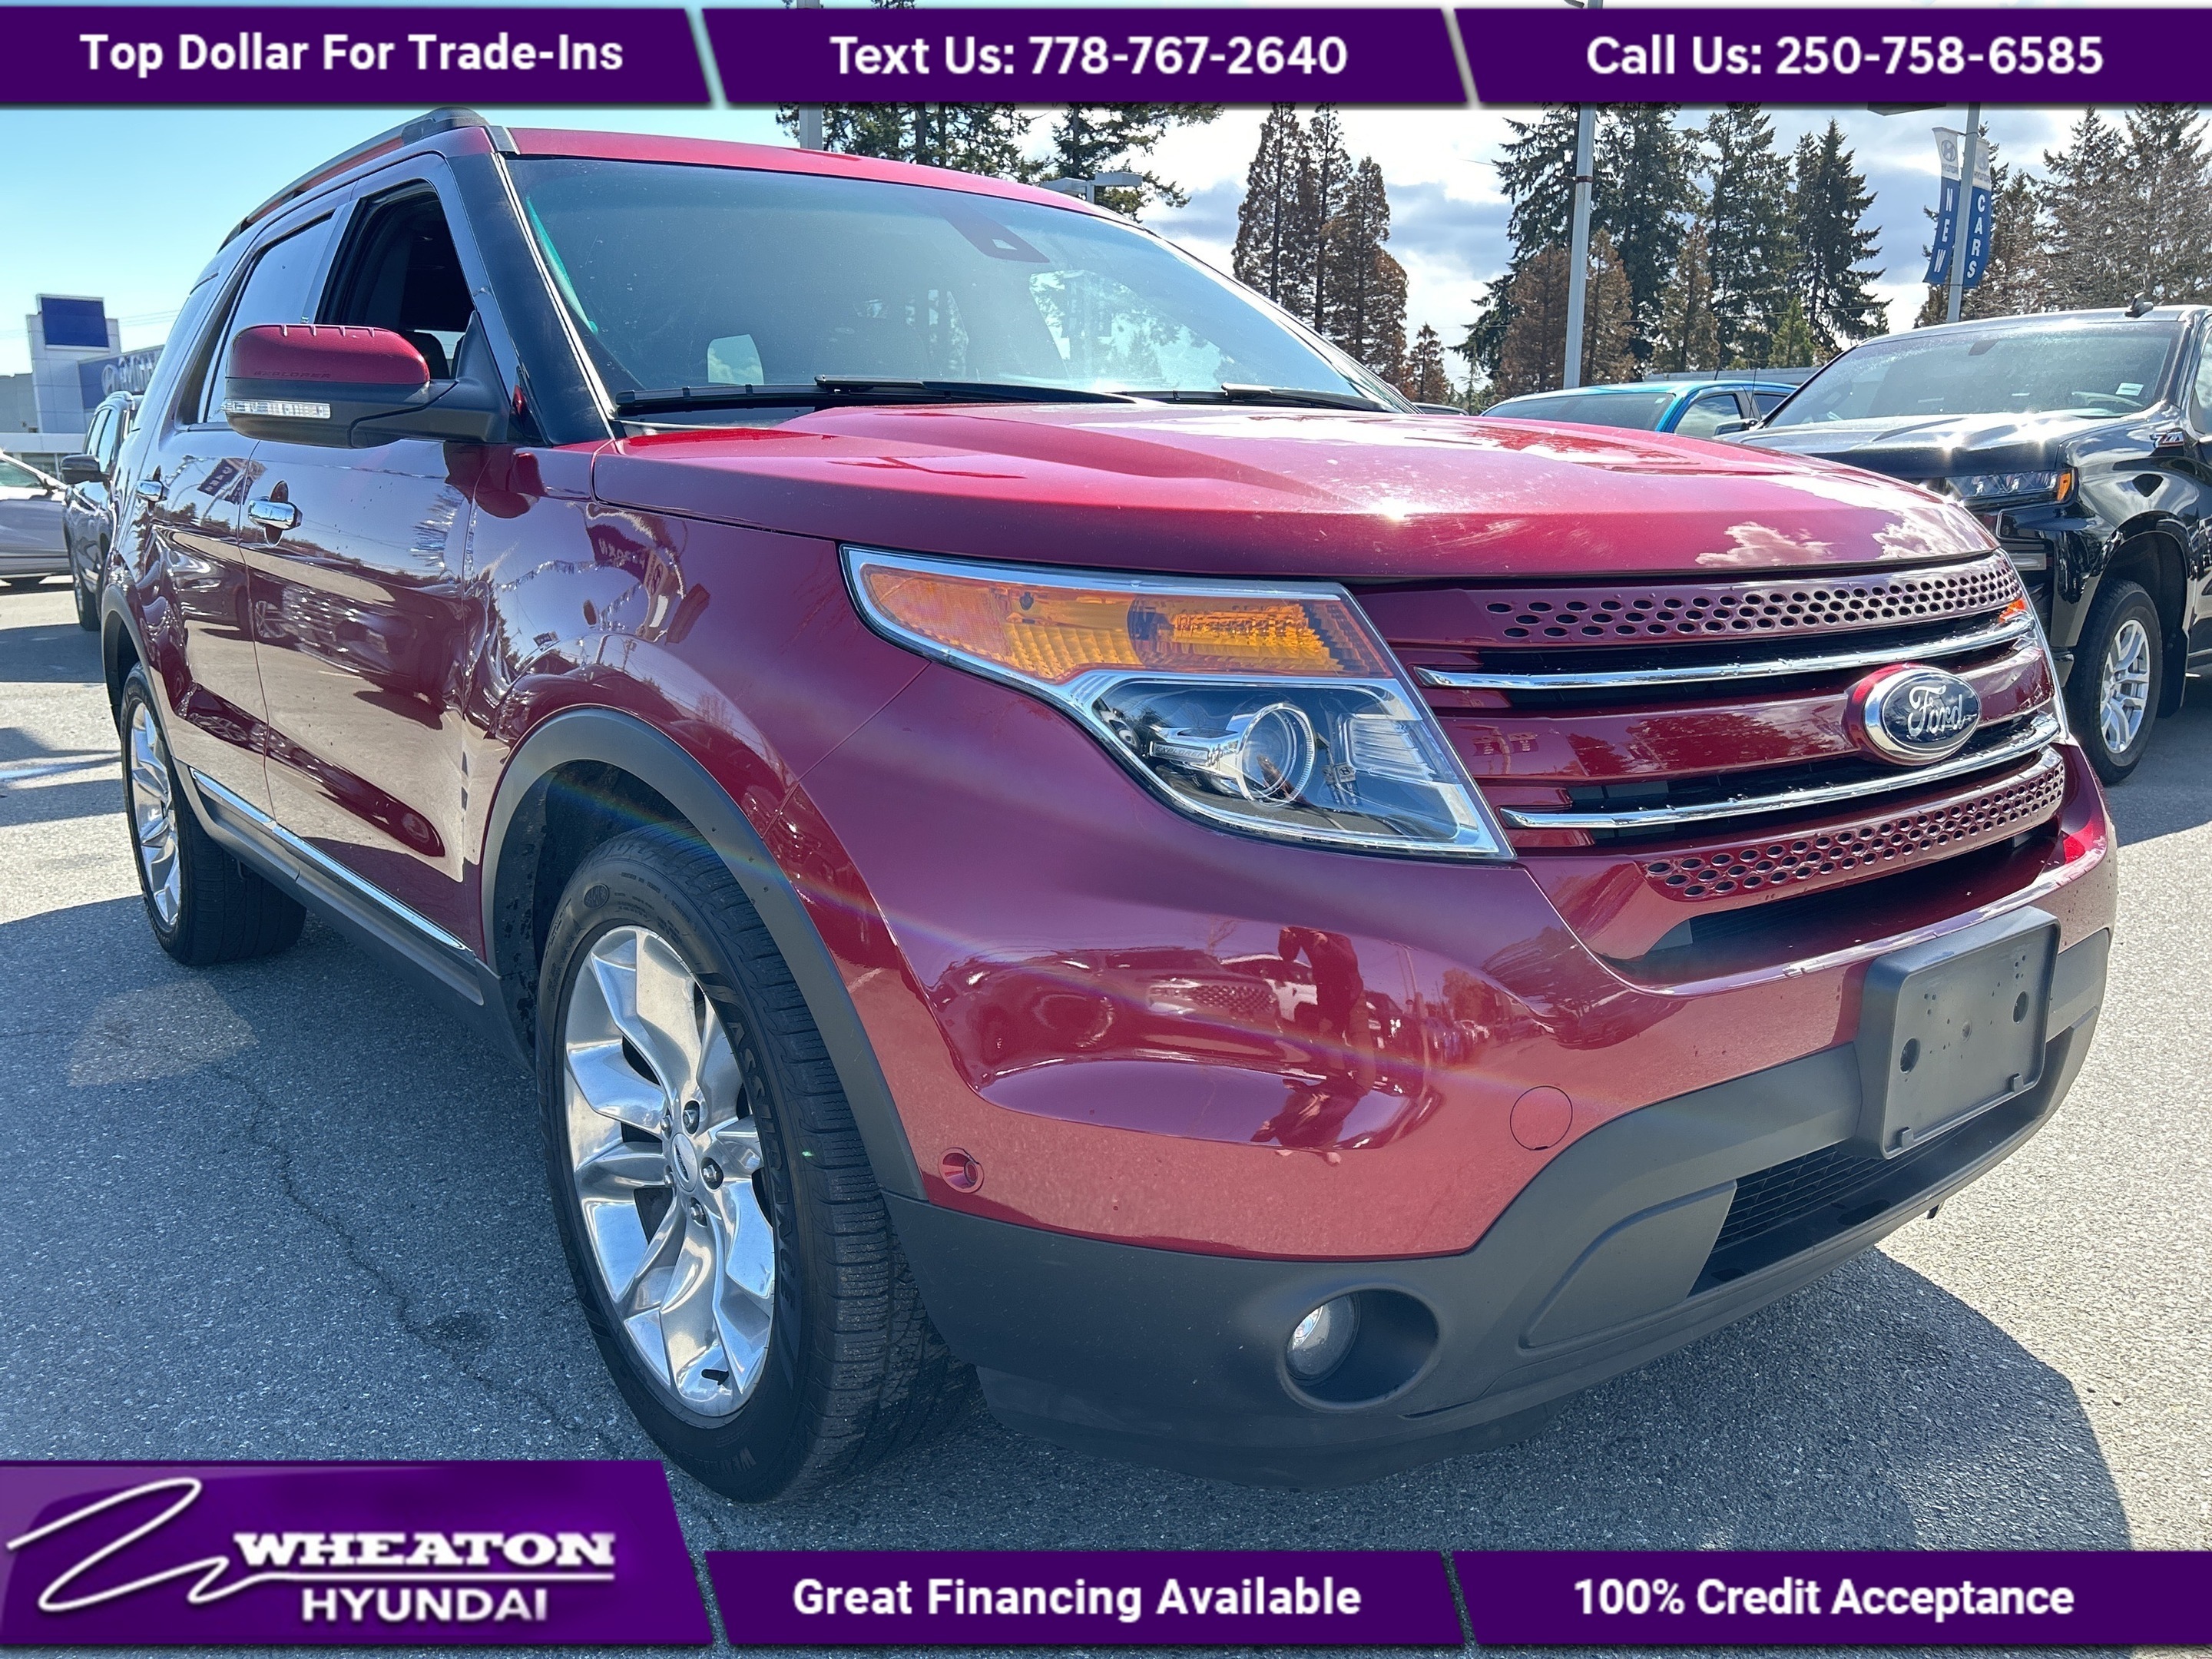 2014 Ford Explorer Limited, One Owner, Trade in, Navigation, Leather,